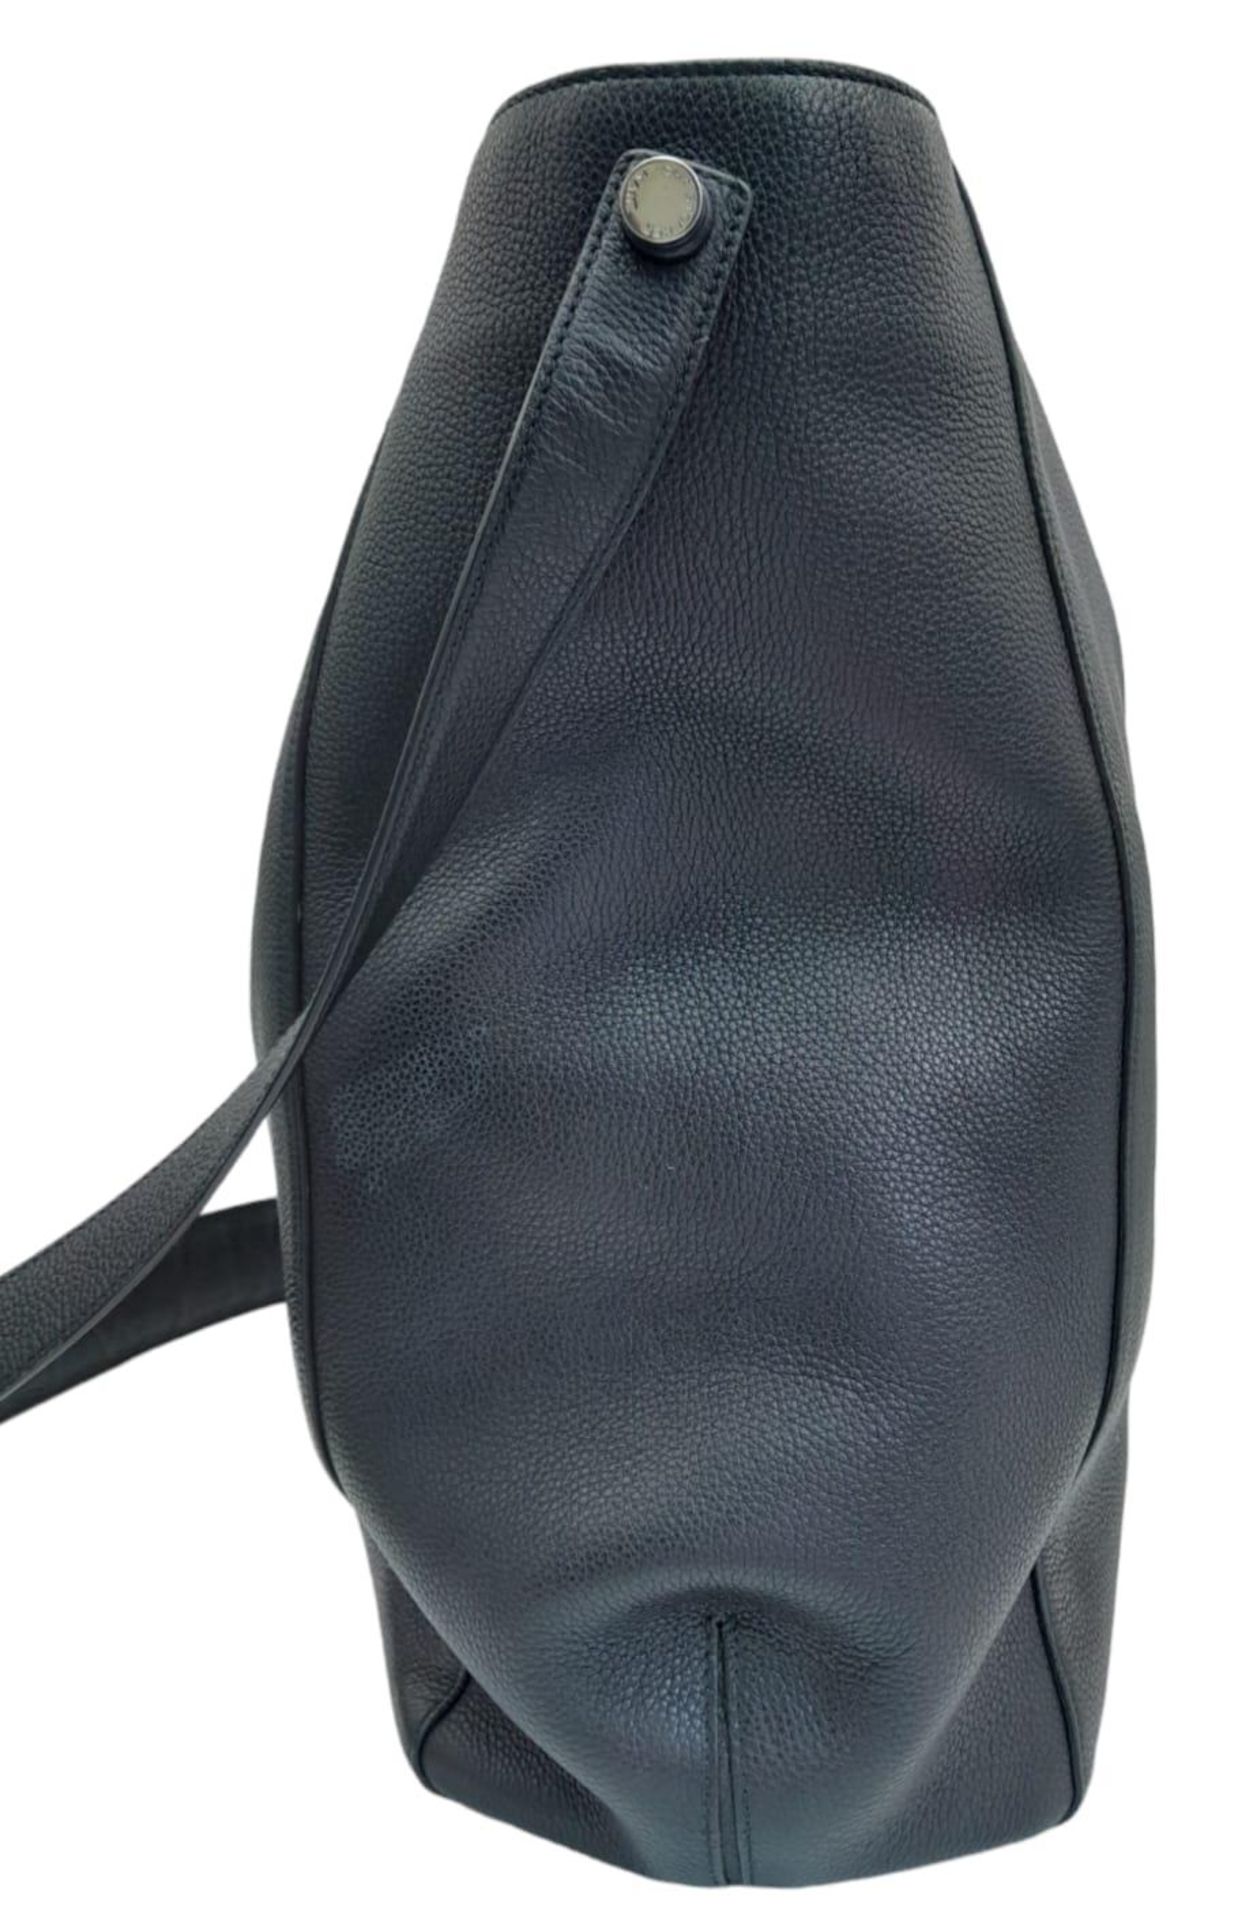 A Christopher Kane Black Tote Bag. Leather exterior with silver-toned hardware, two top handles, - Bild 2 aus 7